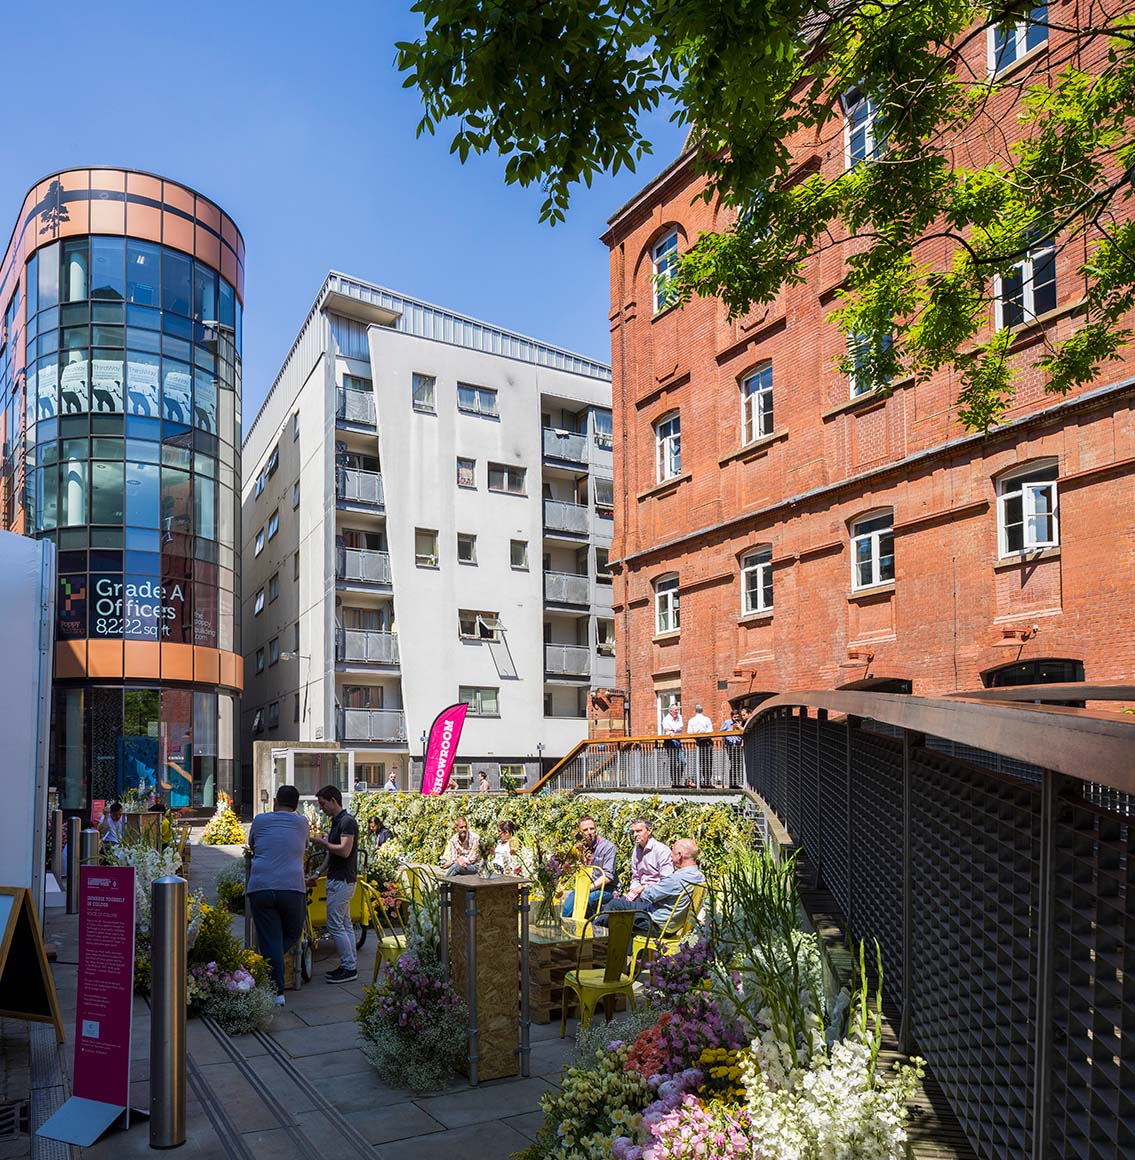 As part of Clerkenwell Design Week, we transformed the external hard cityscape frontage of our London studio into temporary garden installation for visitors to enjoy.